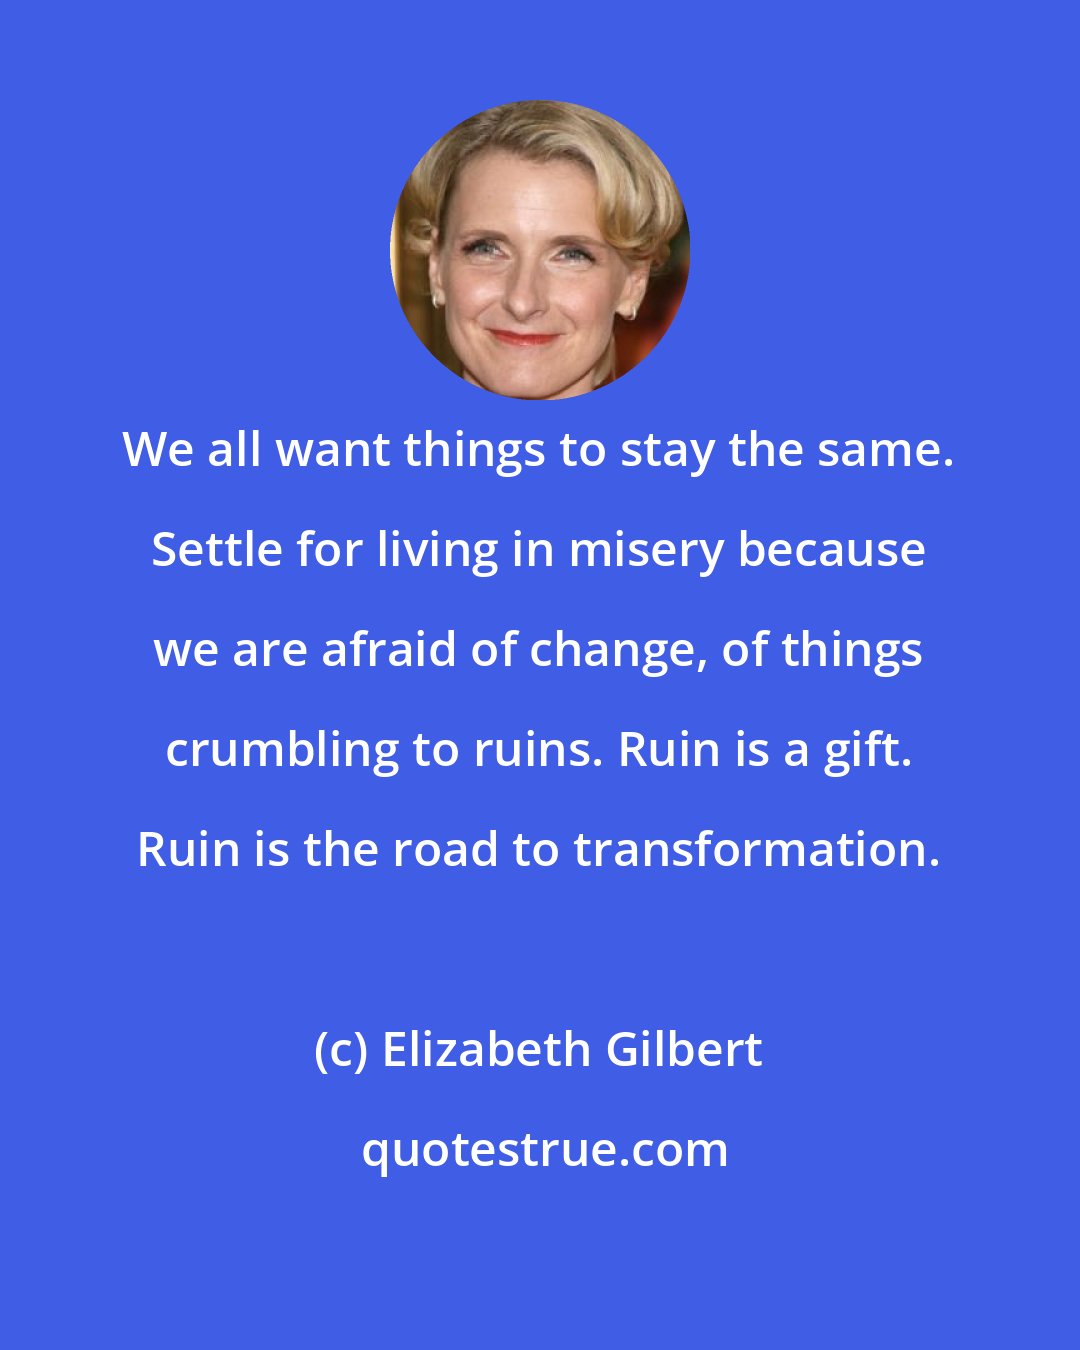 Elizabeth Gilbert: We all want things to stay the same. Settle for living in misery because we are afraid of change, of things crumbling to ruins. Ruin is a gift. Ruin is the road to transformation.